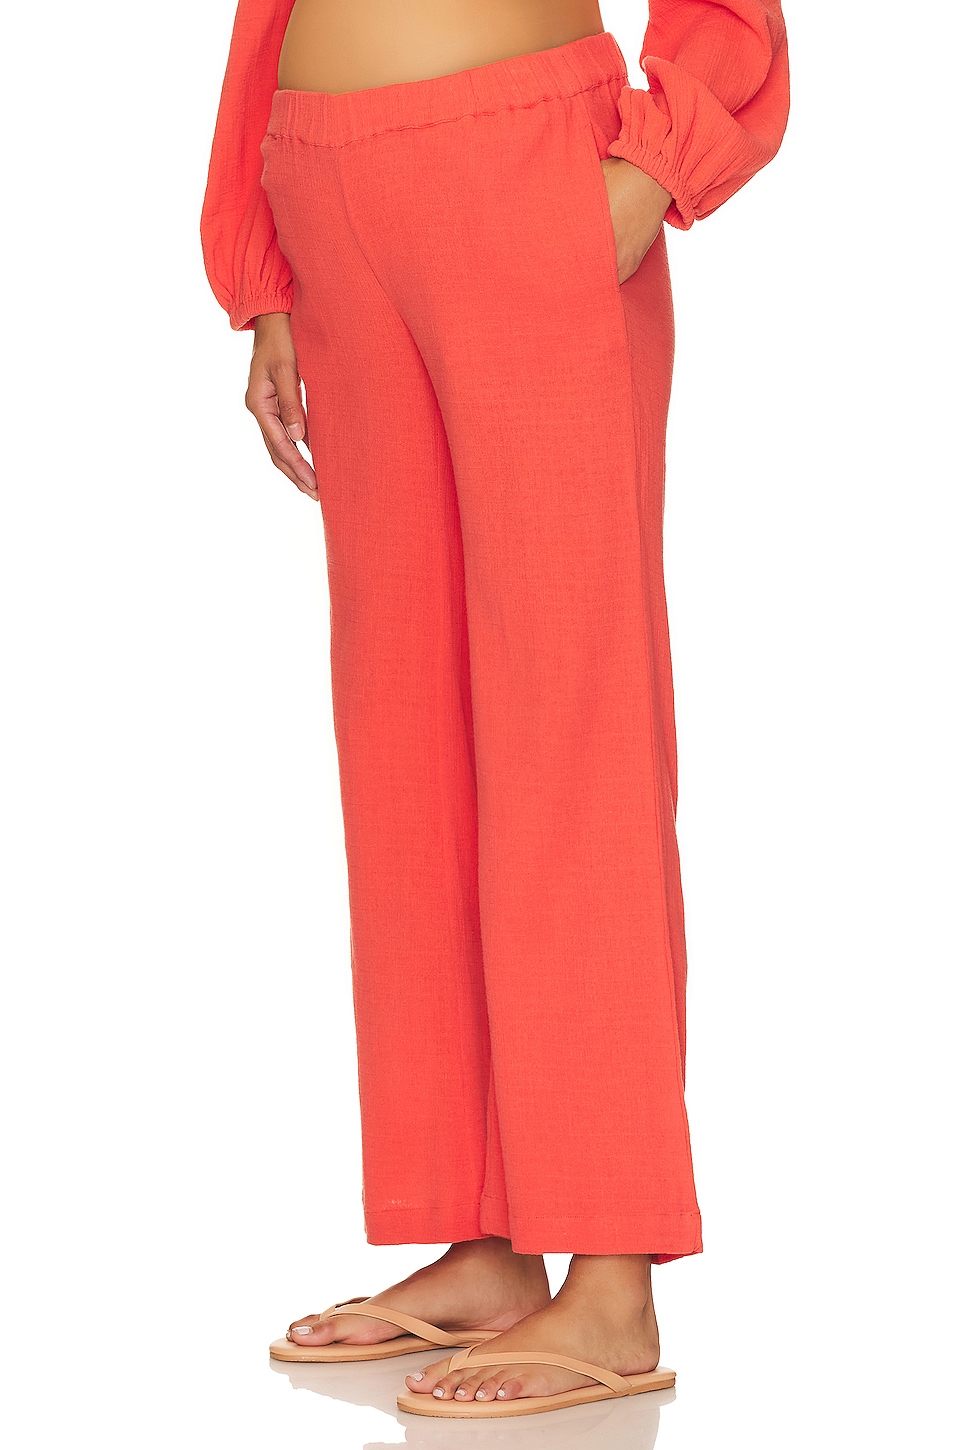 HATCH Shawna Pant in Coral